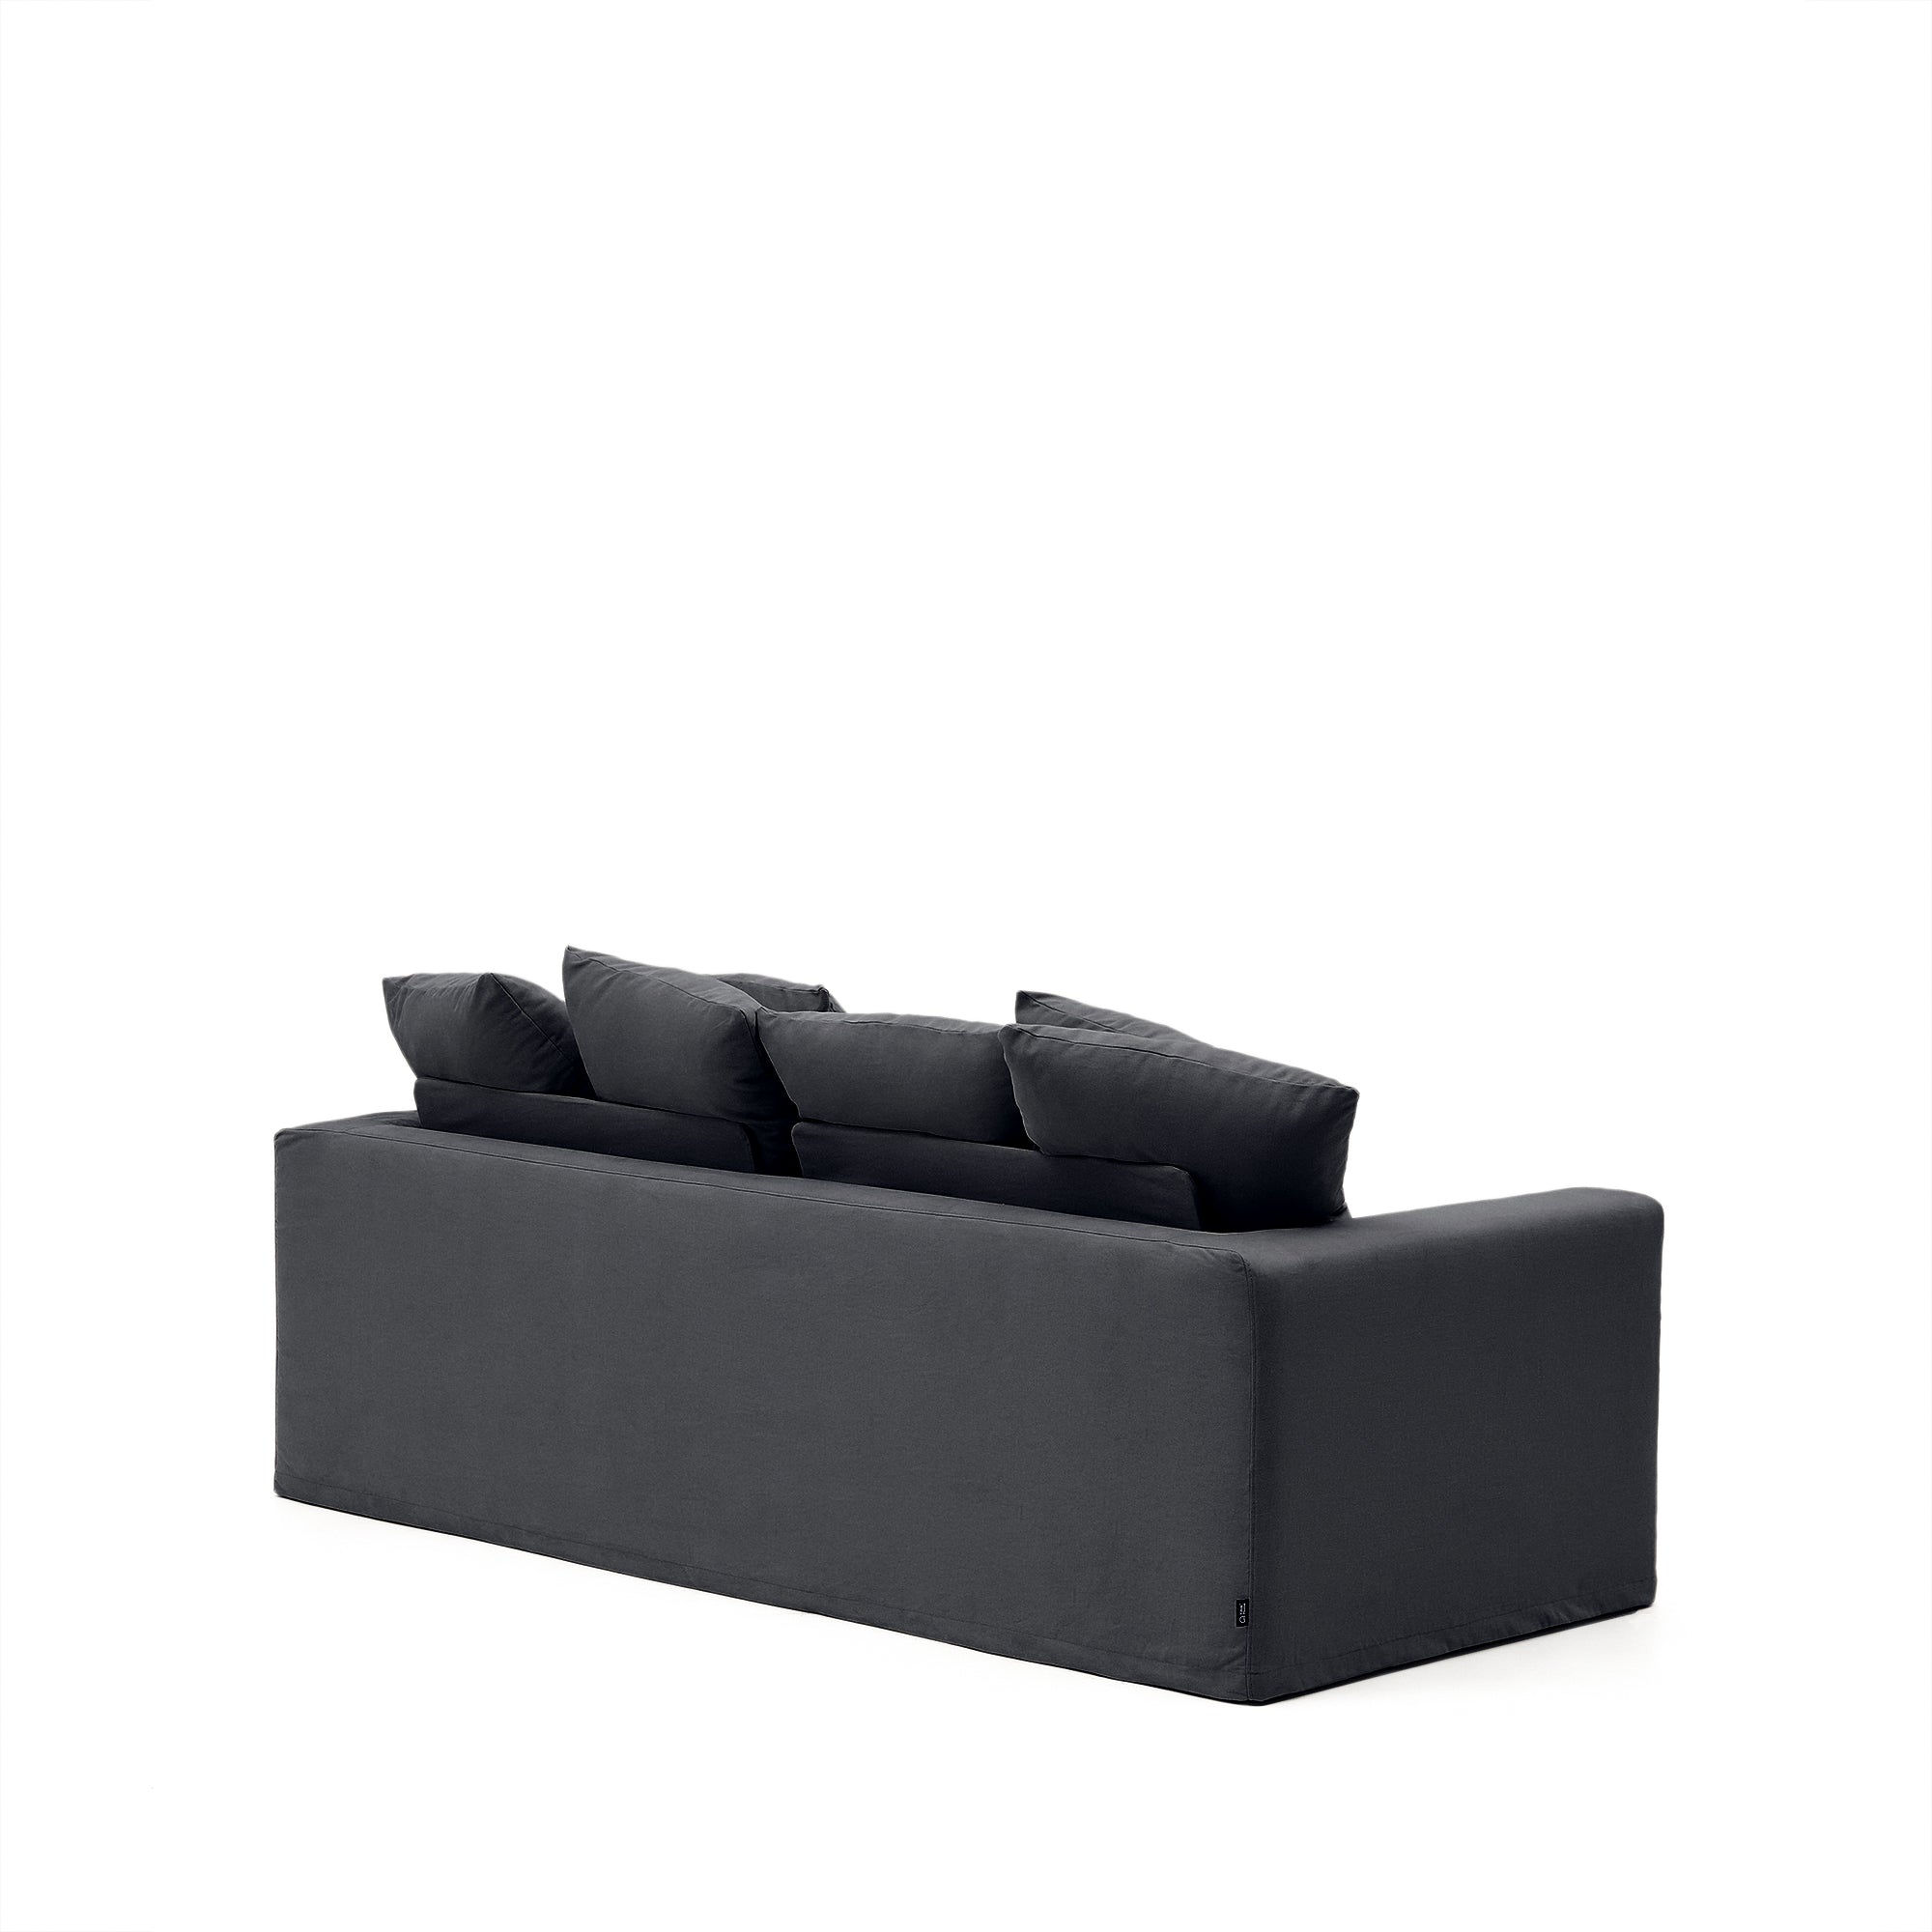 Nora three-seater sofa with removable cover and anthracite gray linen and cotton cushions, 240 cm